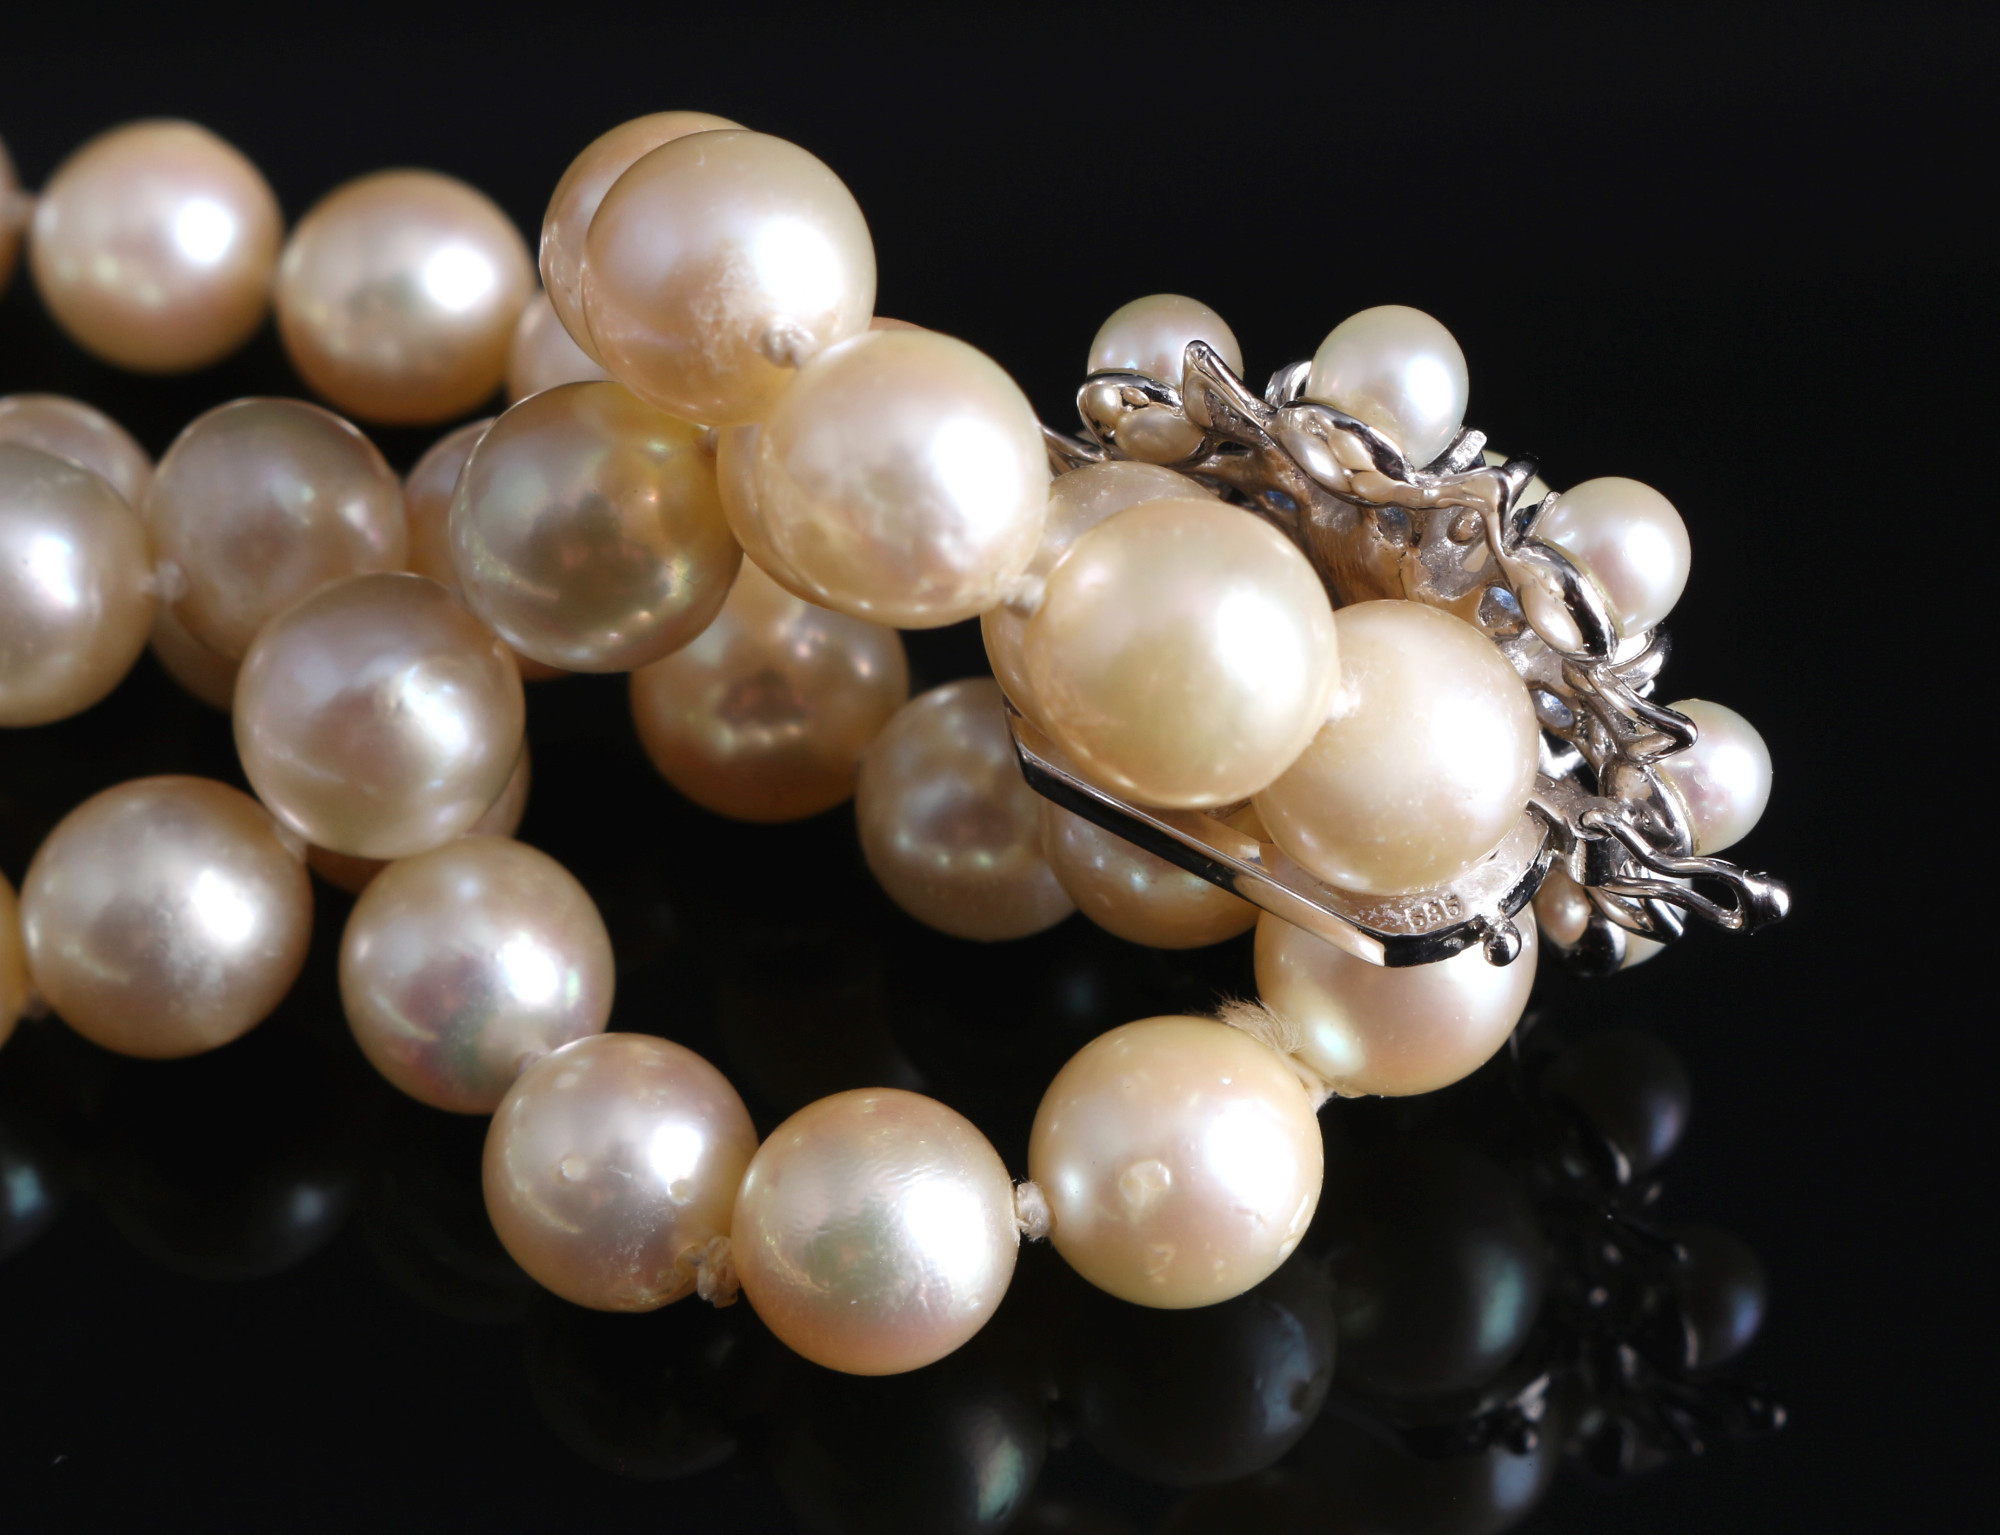 Pearl necklace with large 14K gold clip, Perlenkette / Collier mit 585 Gold Clipverschluss, - Image 6 of 7